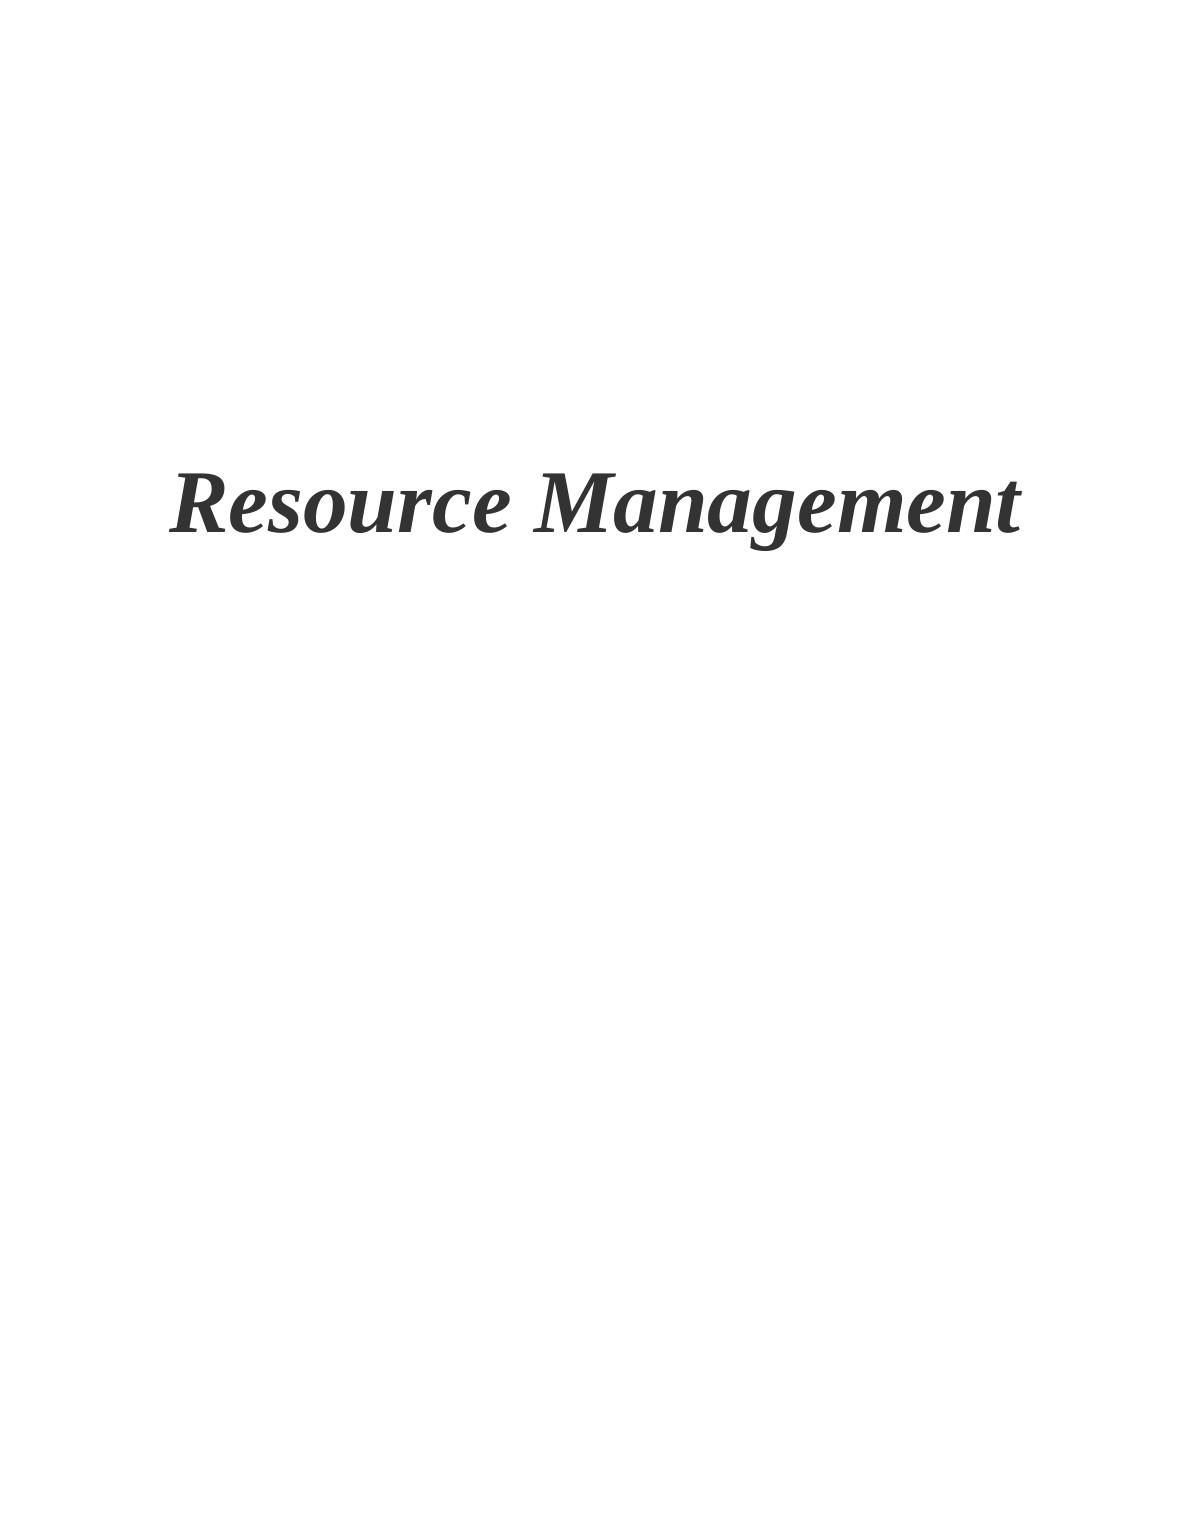 Importance of Resource Management for Organizations_1